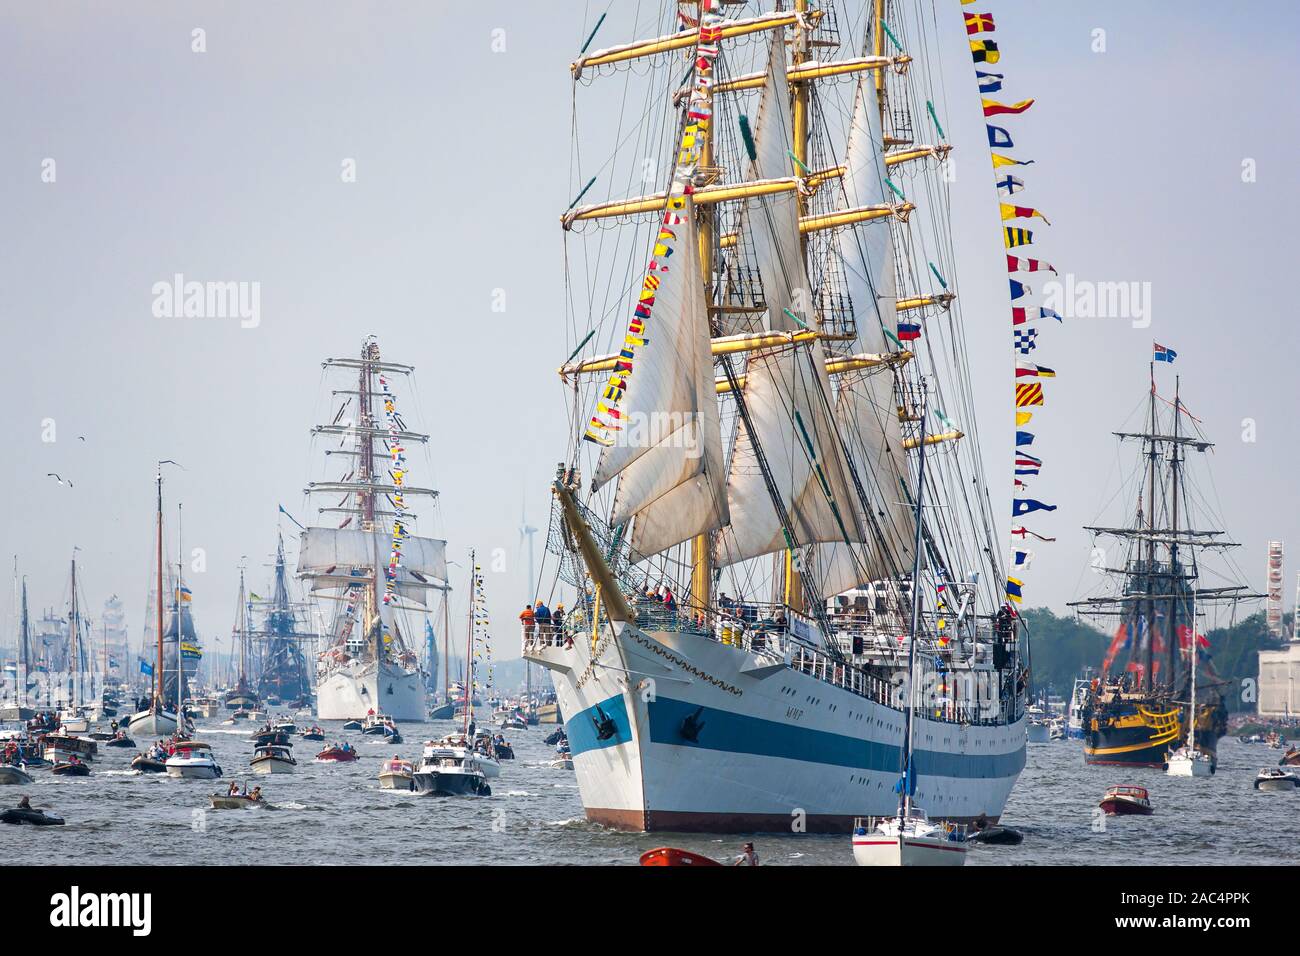 Russian STS Mir, Мир, meaning Peace, three-masted tall ship from Russia sailing into Amsterdam during the Amsterdam Sail 2015 Tall Ships event. Stock Photo